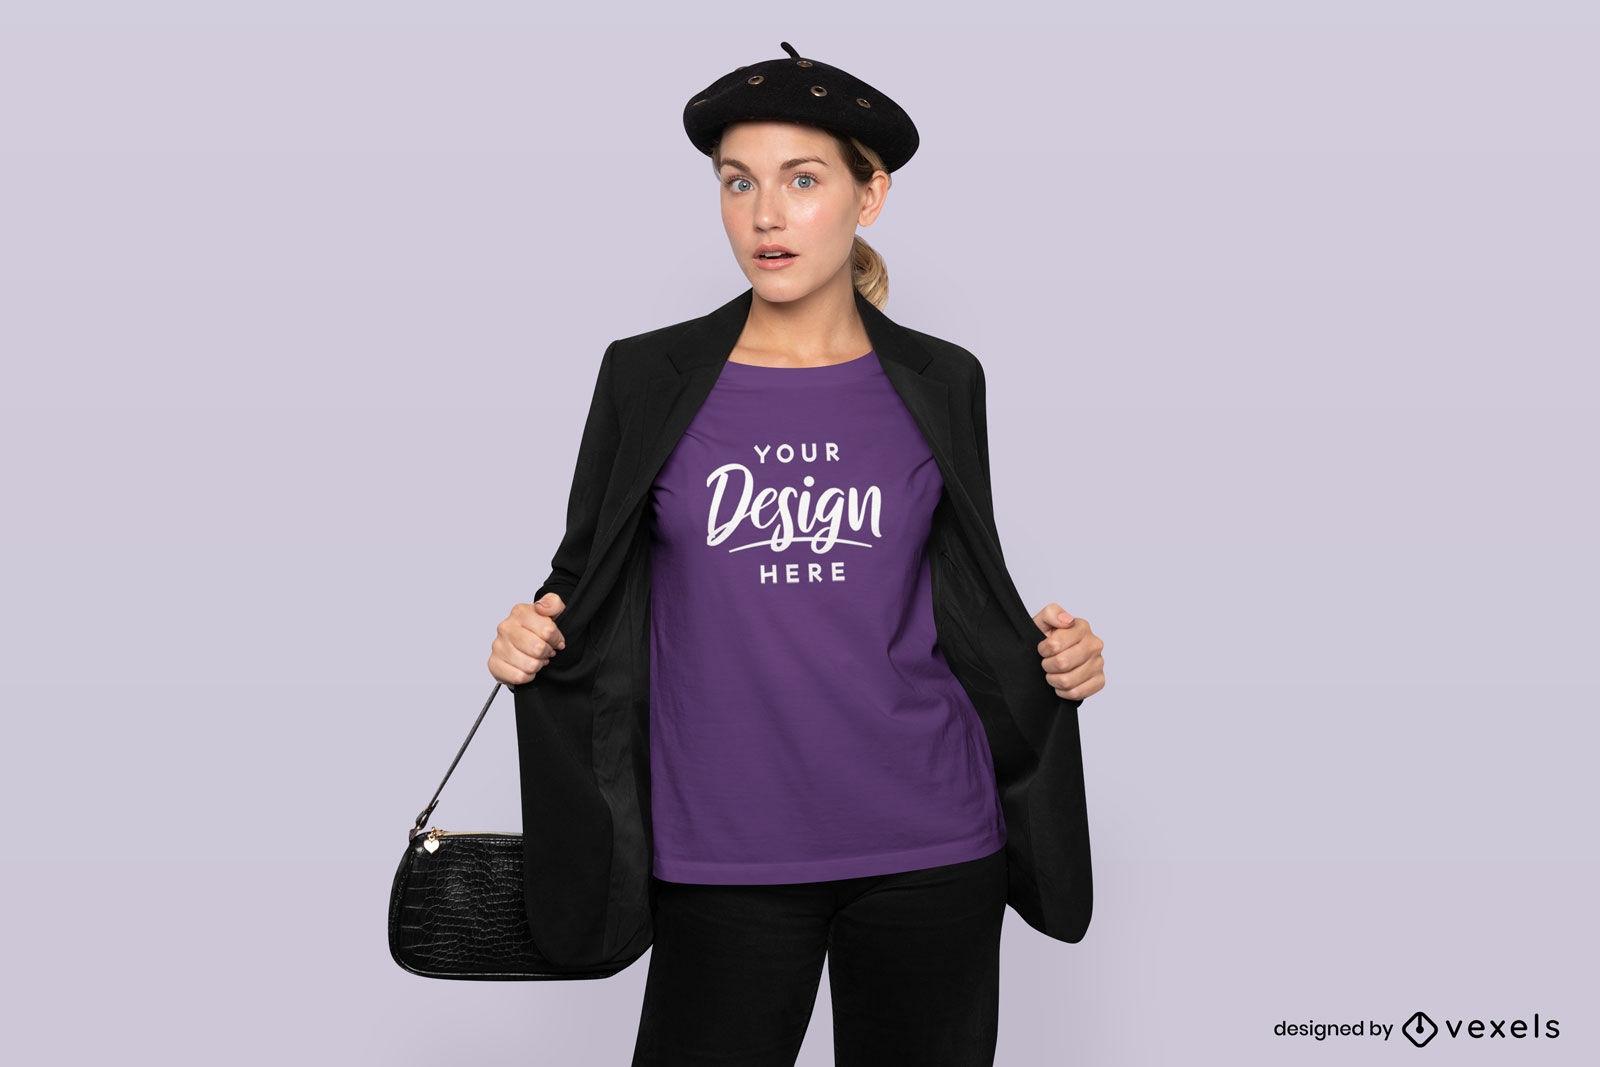 French woman with jacket and t-shirt mockup